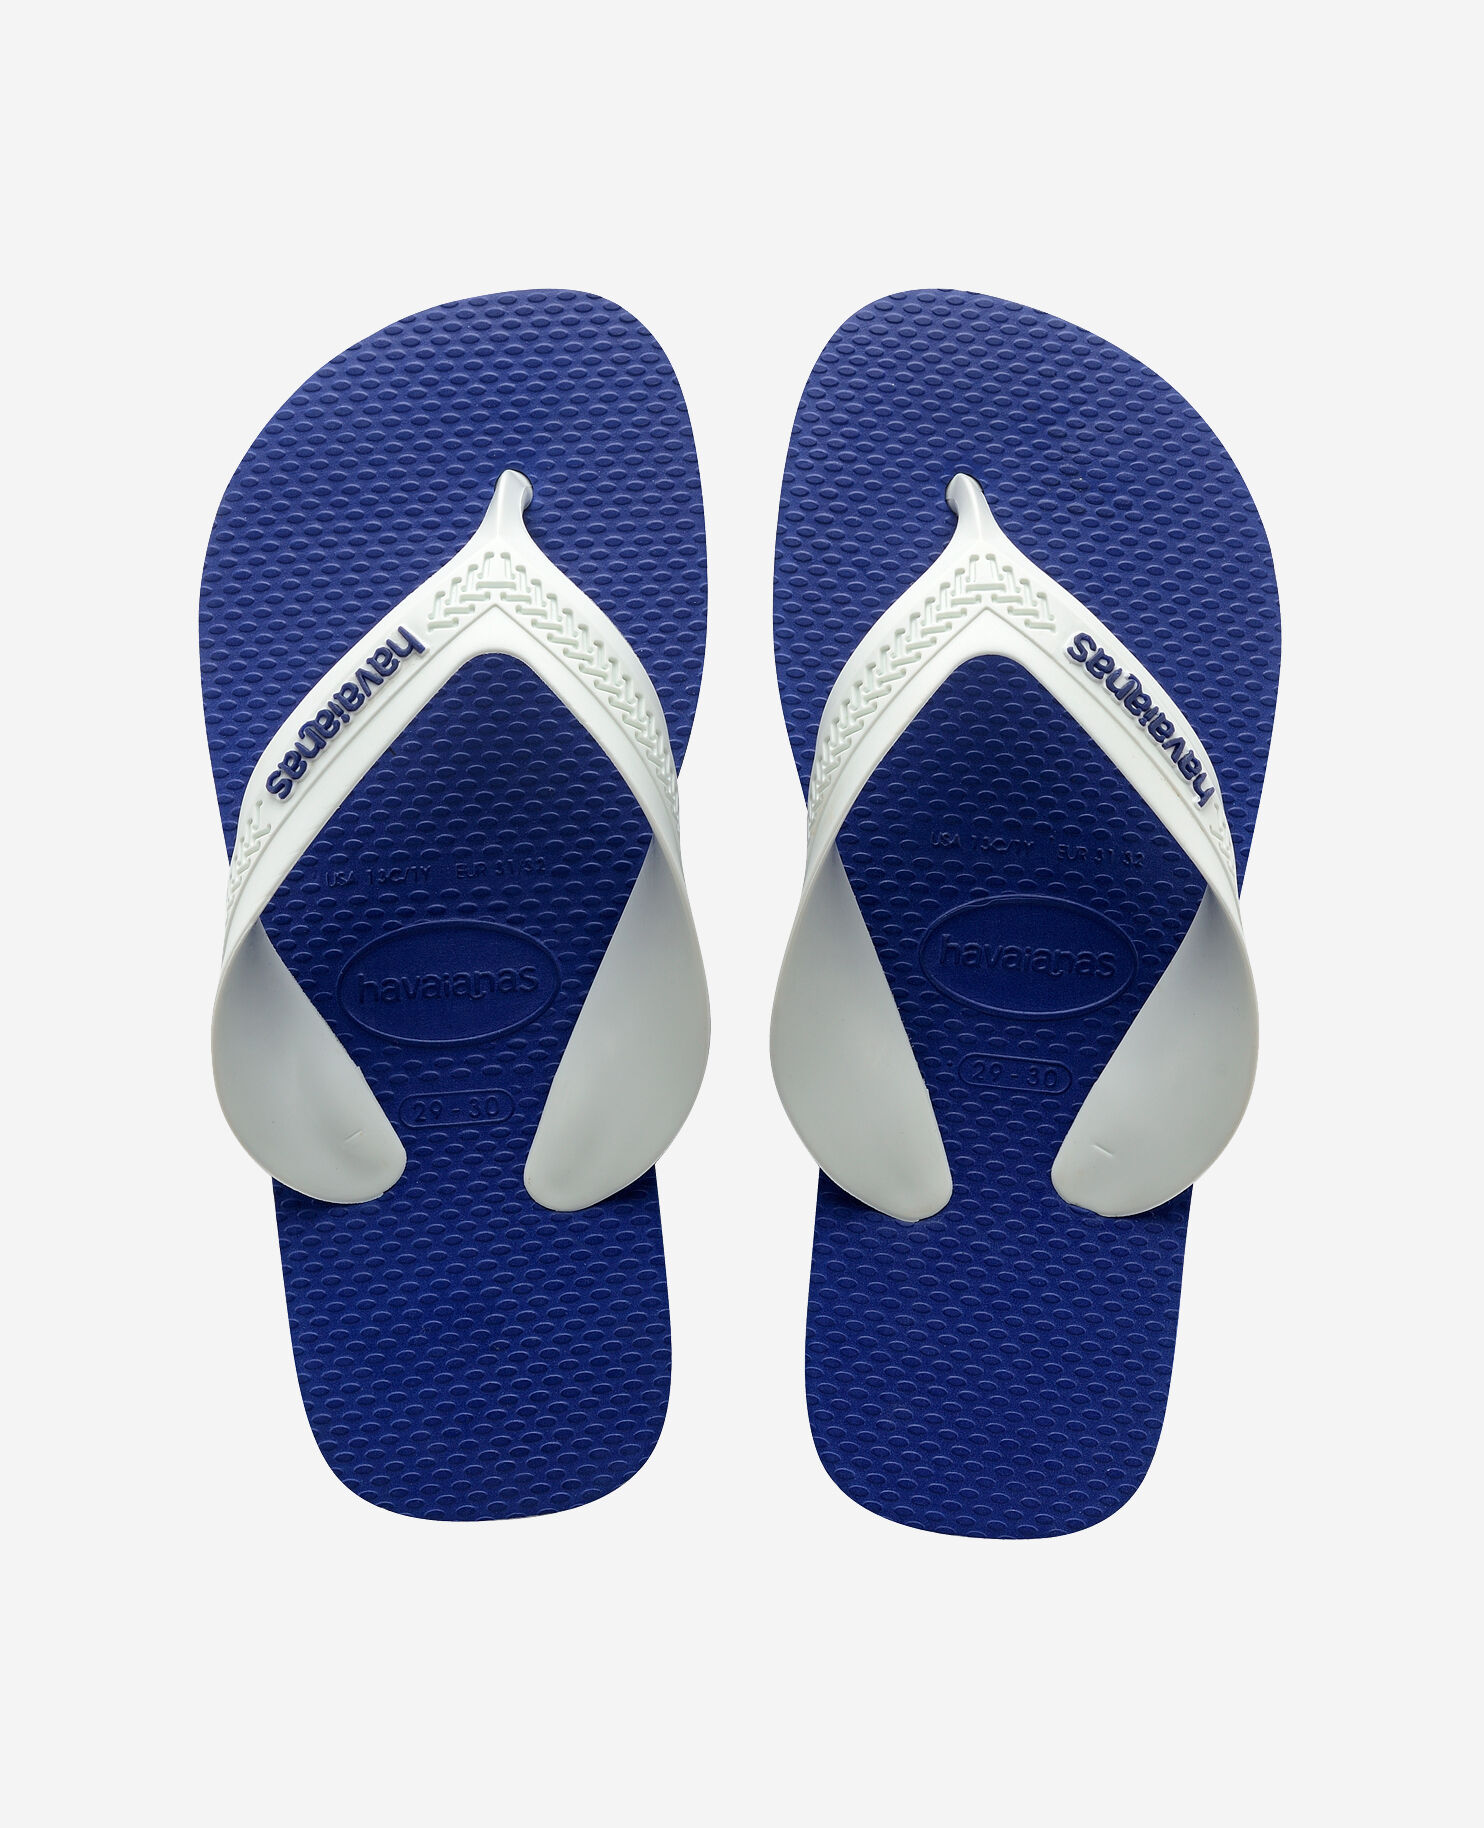 BLUE  BRAND NEW RRP $30 GIRLS  SIZE 35-36 BLACK Details about   HAVAIANAS THONGS BOYS 